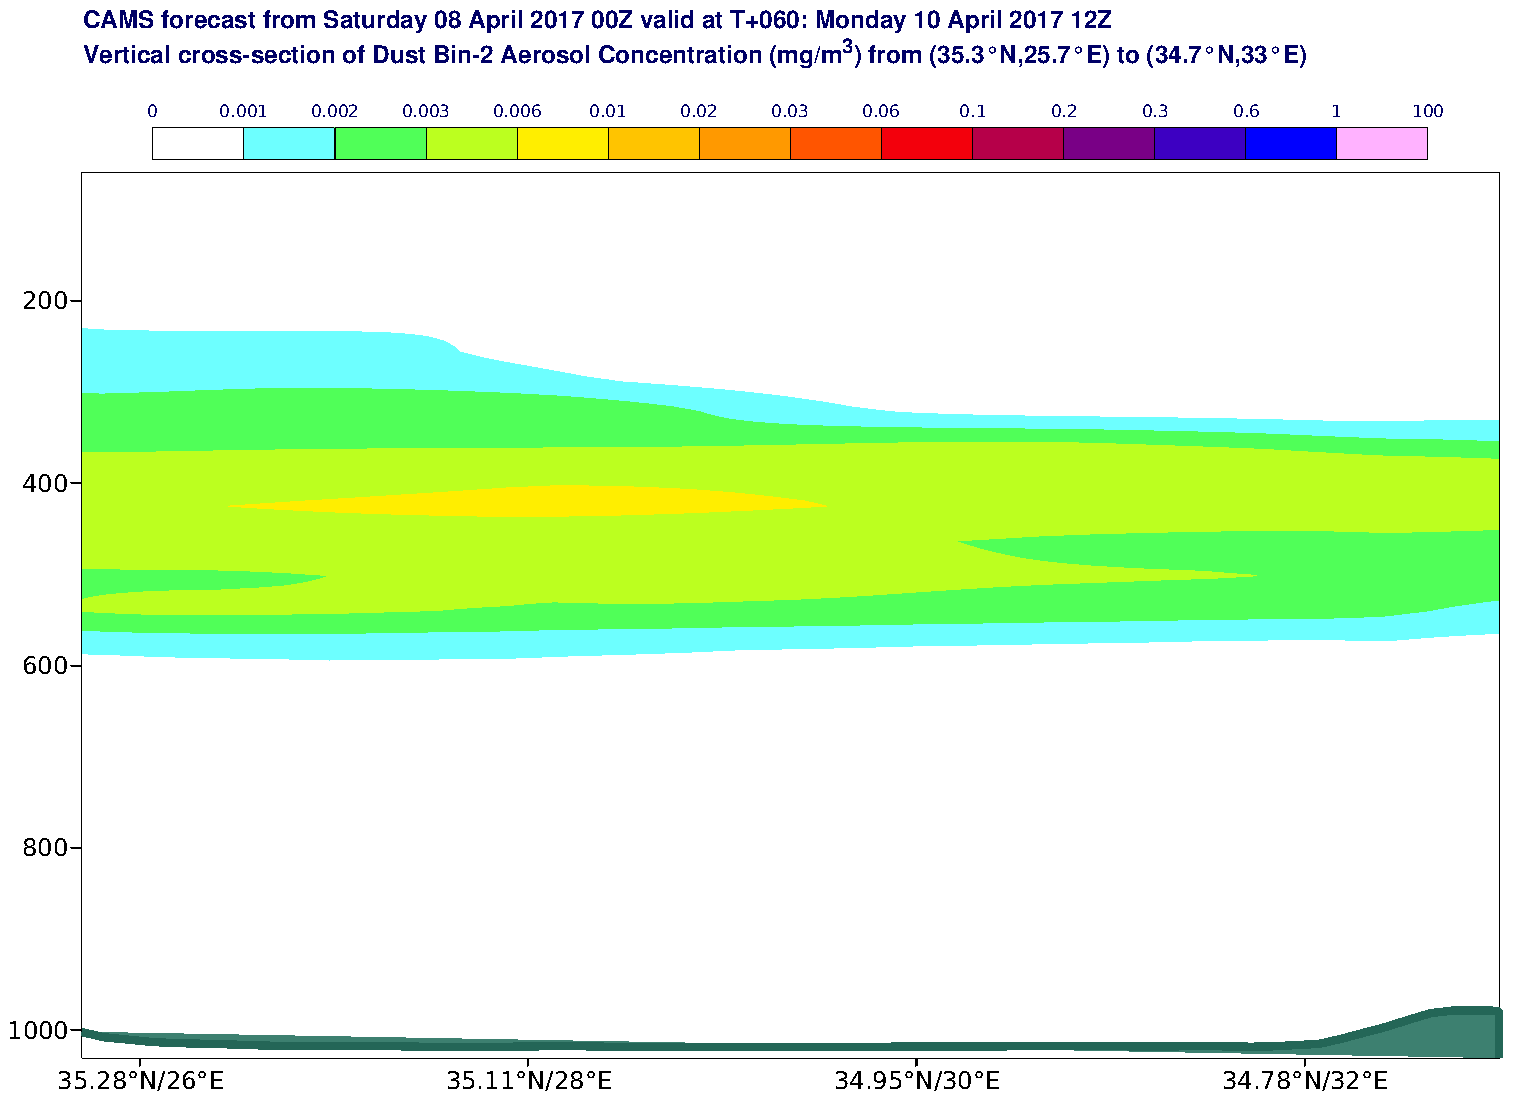 Vertical cross-section of Dust Bin-2 Aerosol Concentration (mg/m3) valid at T60 - 2017-04-10 12:00